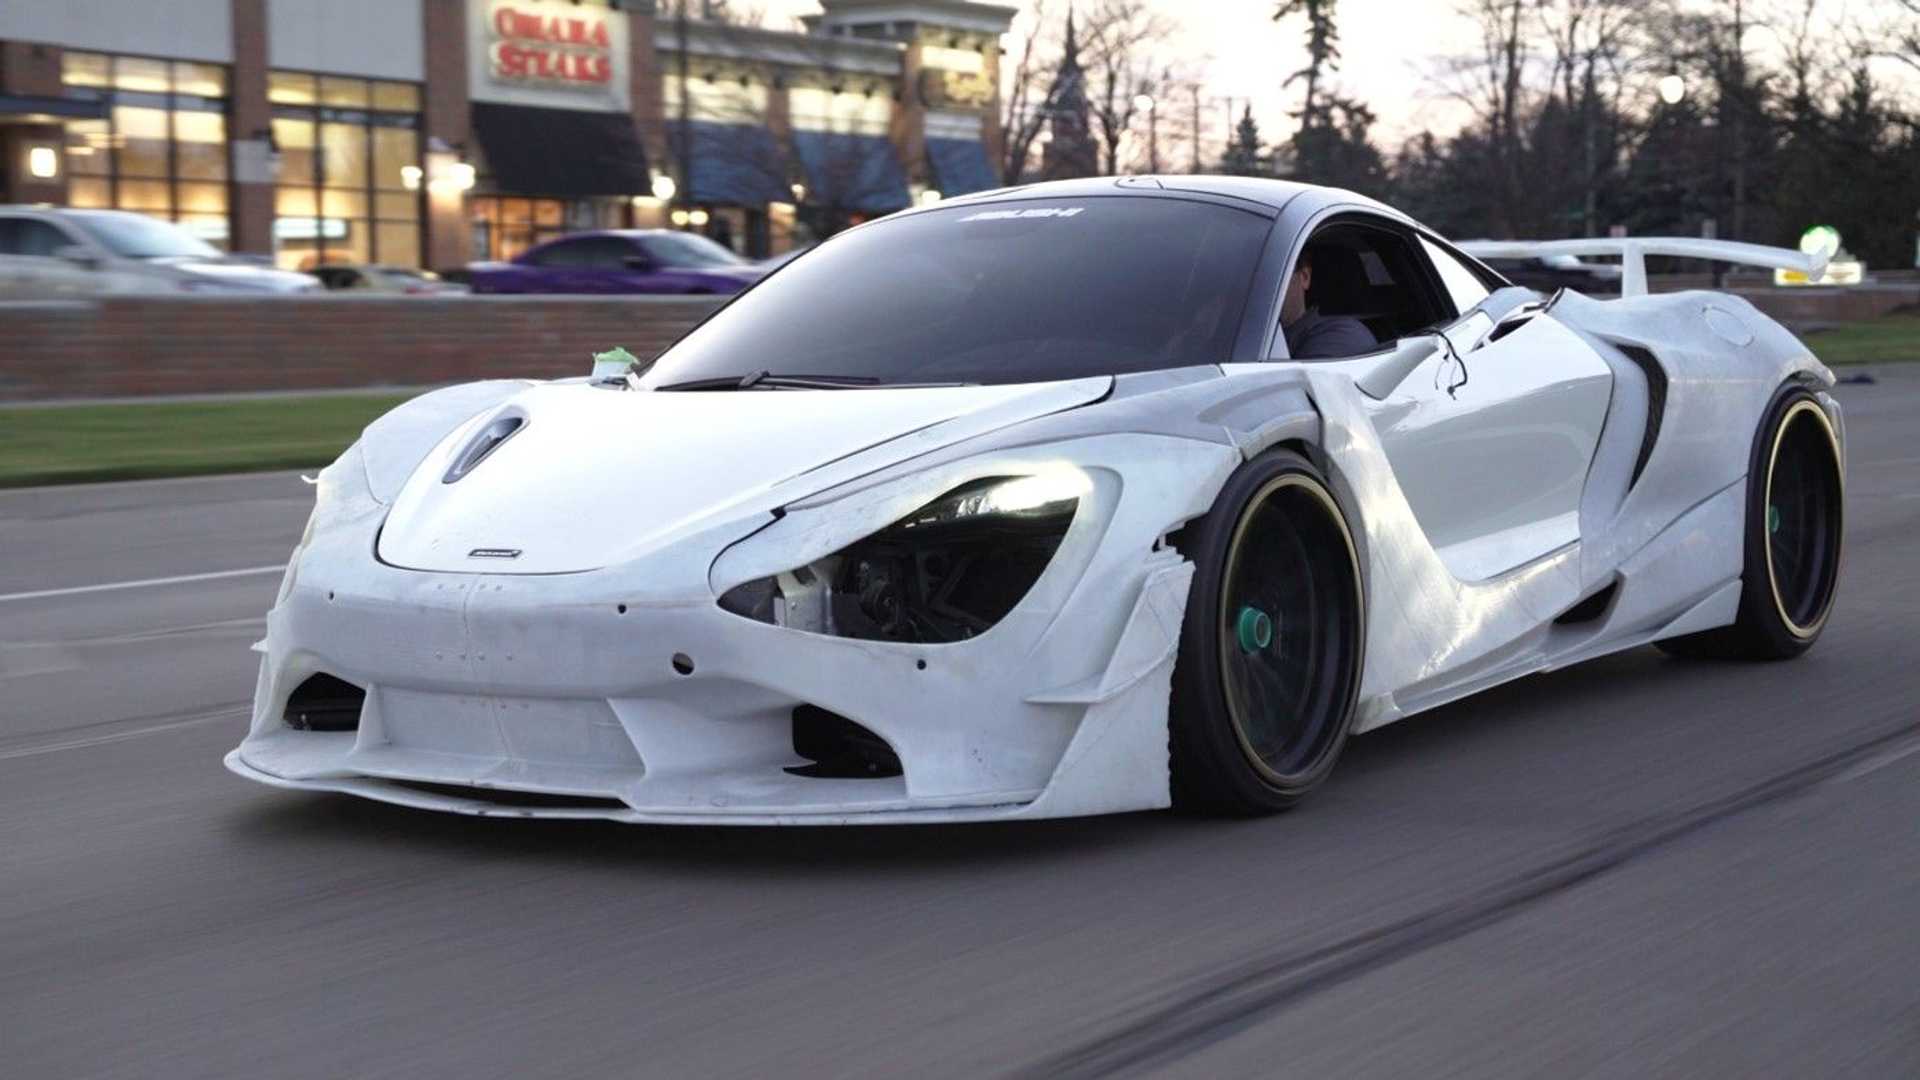 3D-printed body kits: Could it become a thing?